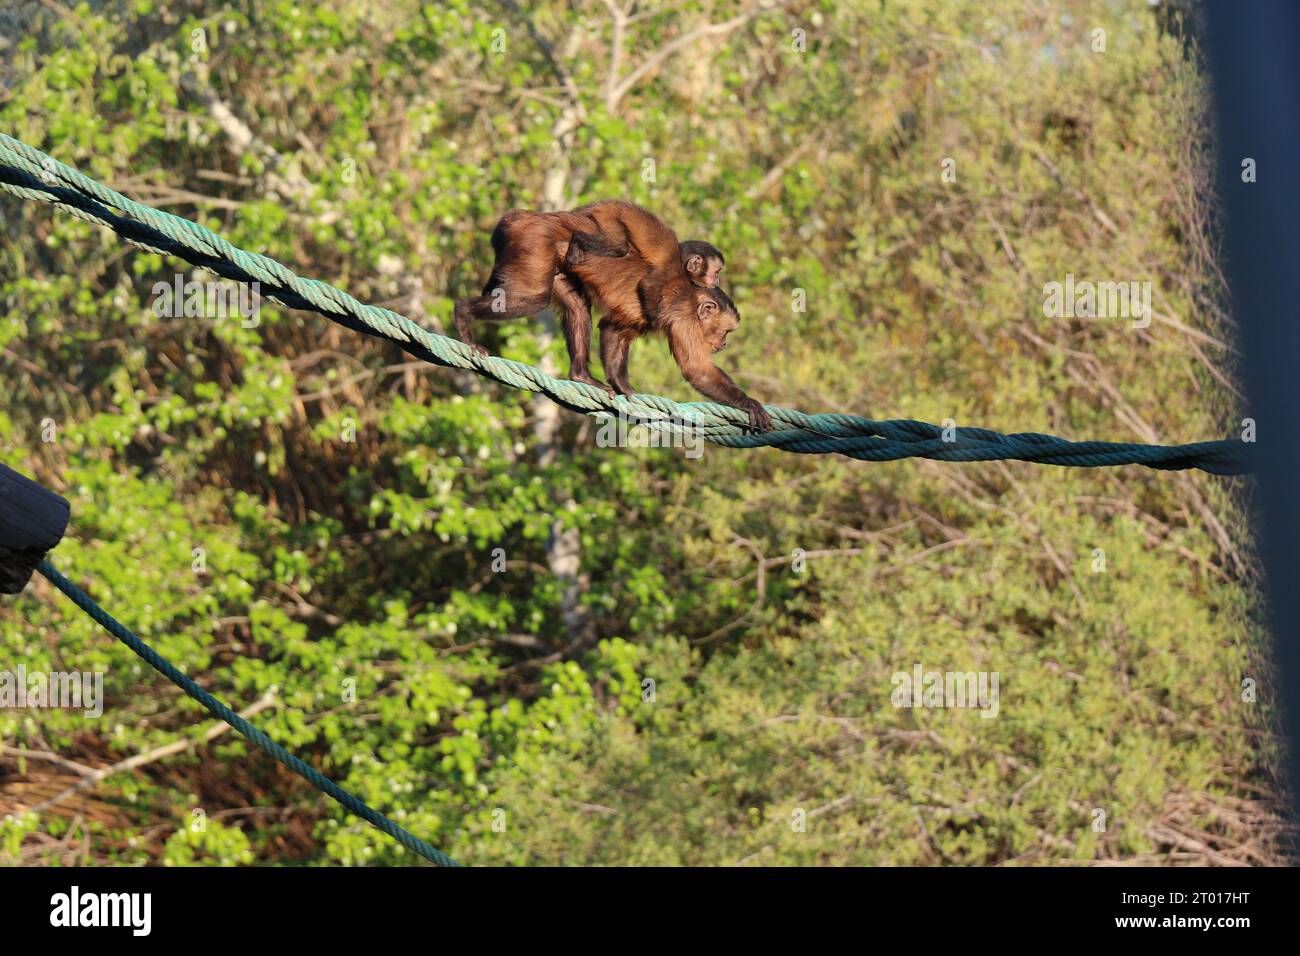 Monkey walking on a rope with baby monkey in Madrid zoo Stock Photo